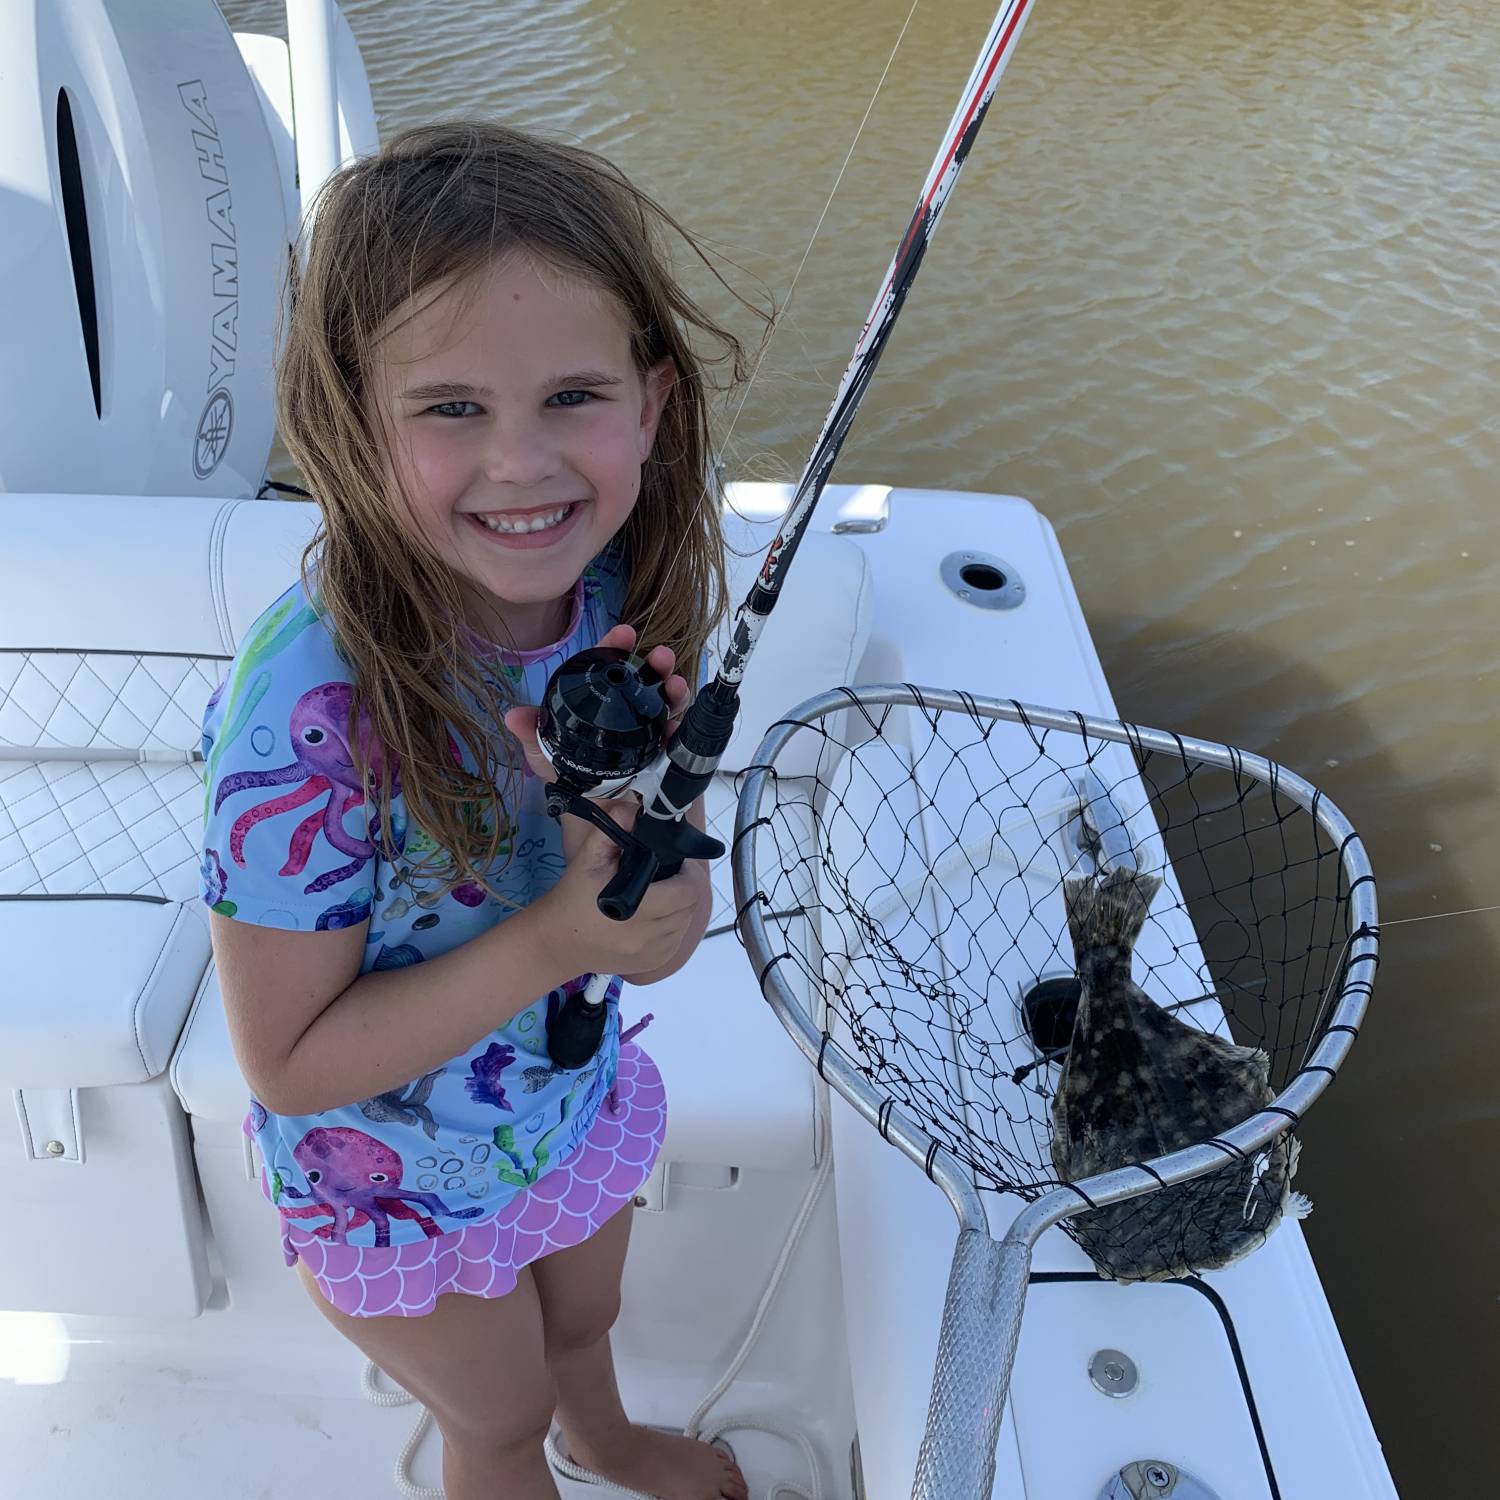 Title: My Girl! - On board their Sportsman Heritage 211 Center Console - Location: Coastal Georgia. Participating in the Photo Contest #SportsmanApril